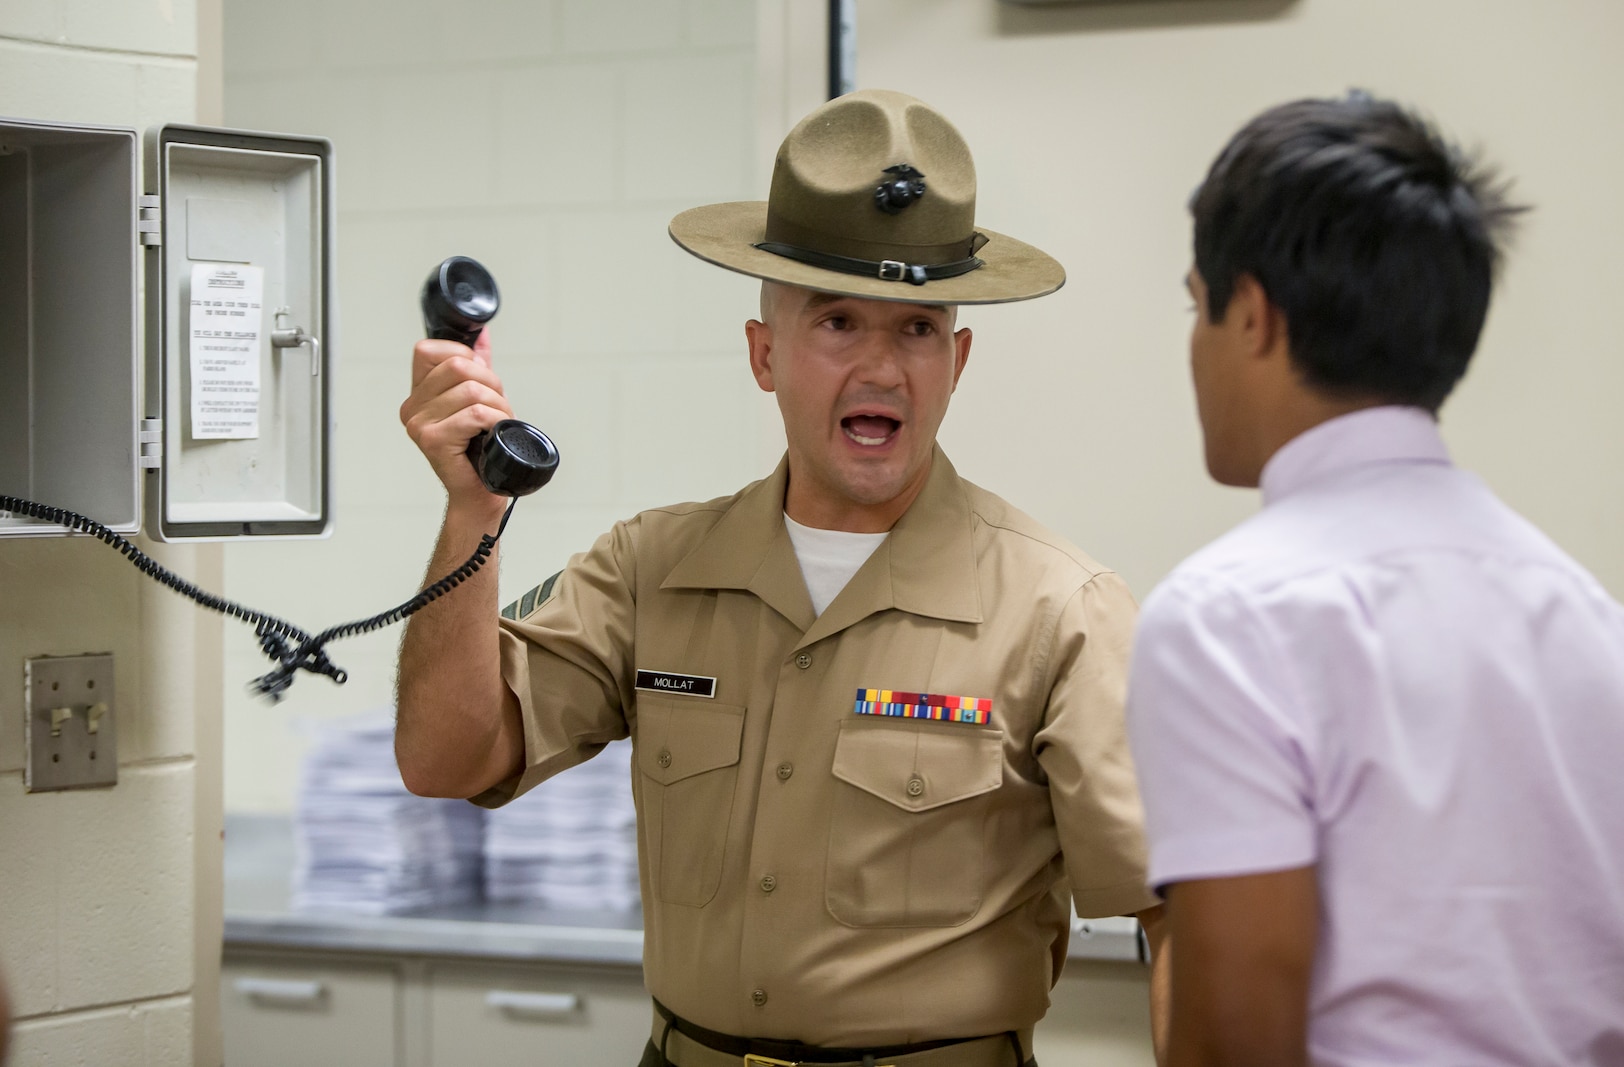 The new recruits make a scripted phone call home to inform their next of kin that they have arrived safely at Parris Island, S.C. The receiving process includes the recruit’s phone call home, gear issue, and haircuts. (U.S. Marine Corps photo by Pfc. Michelle Brudnicki)